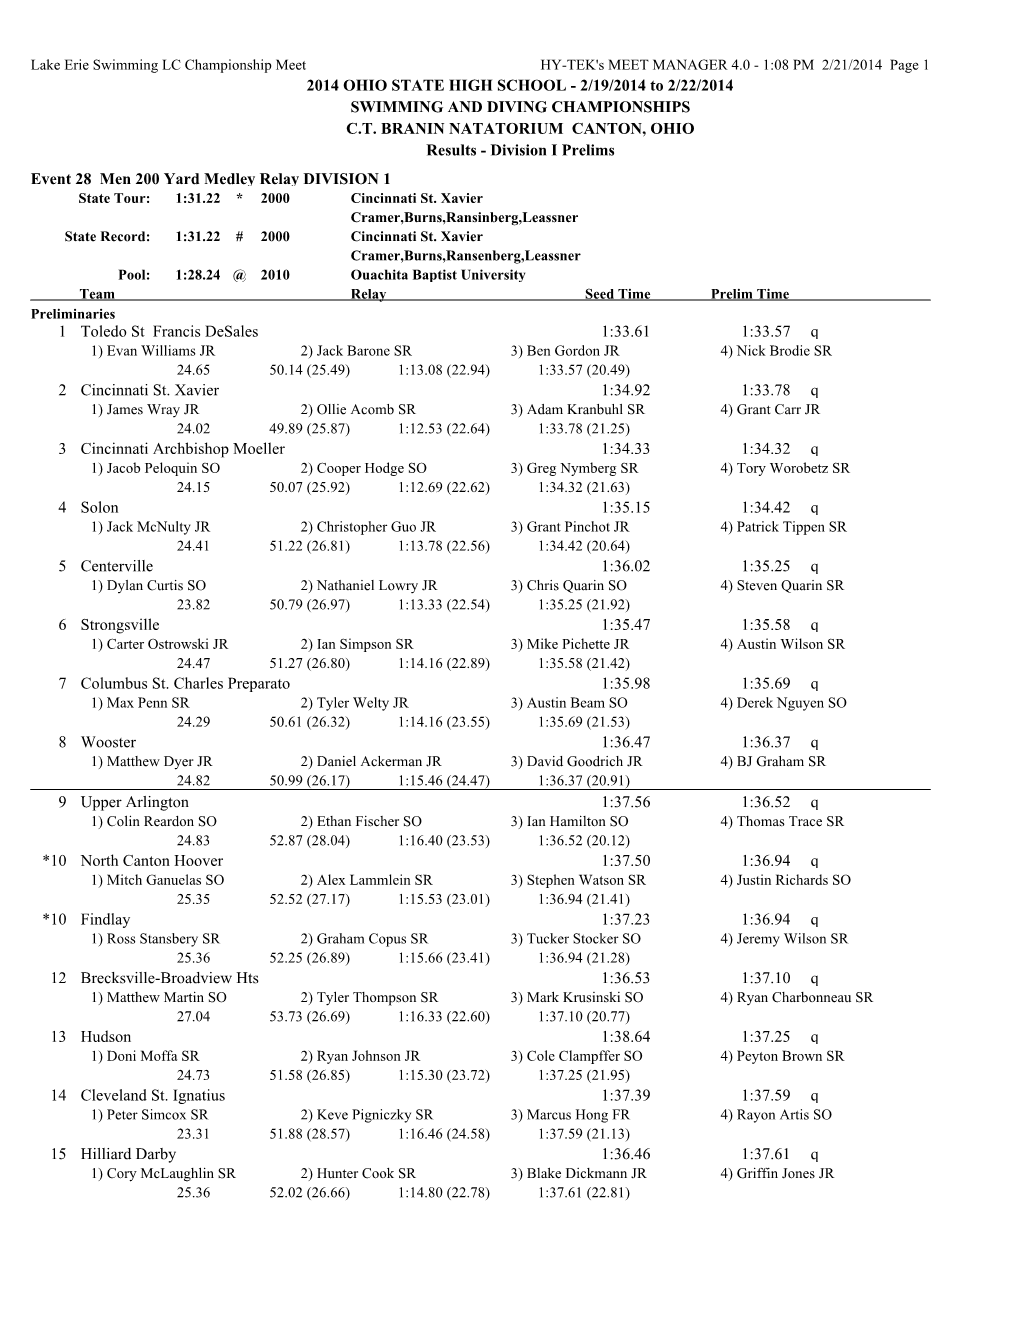 2014 OHIO STATE HIGH SCHOOL - 2/19/2014 to 2/22/2014 SWIMMING and DIVING CHAMPIONSHIPS C.T